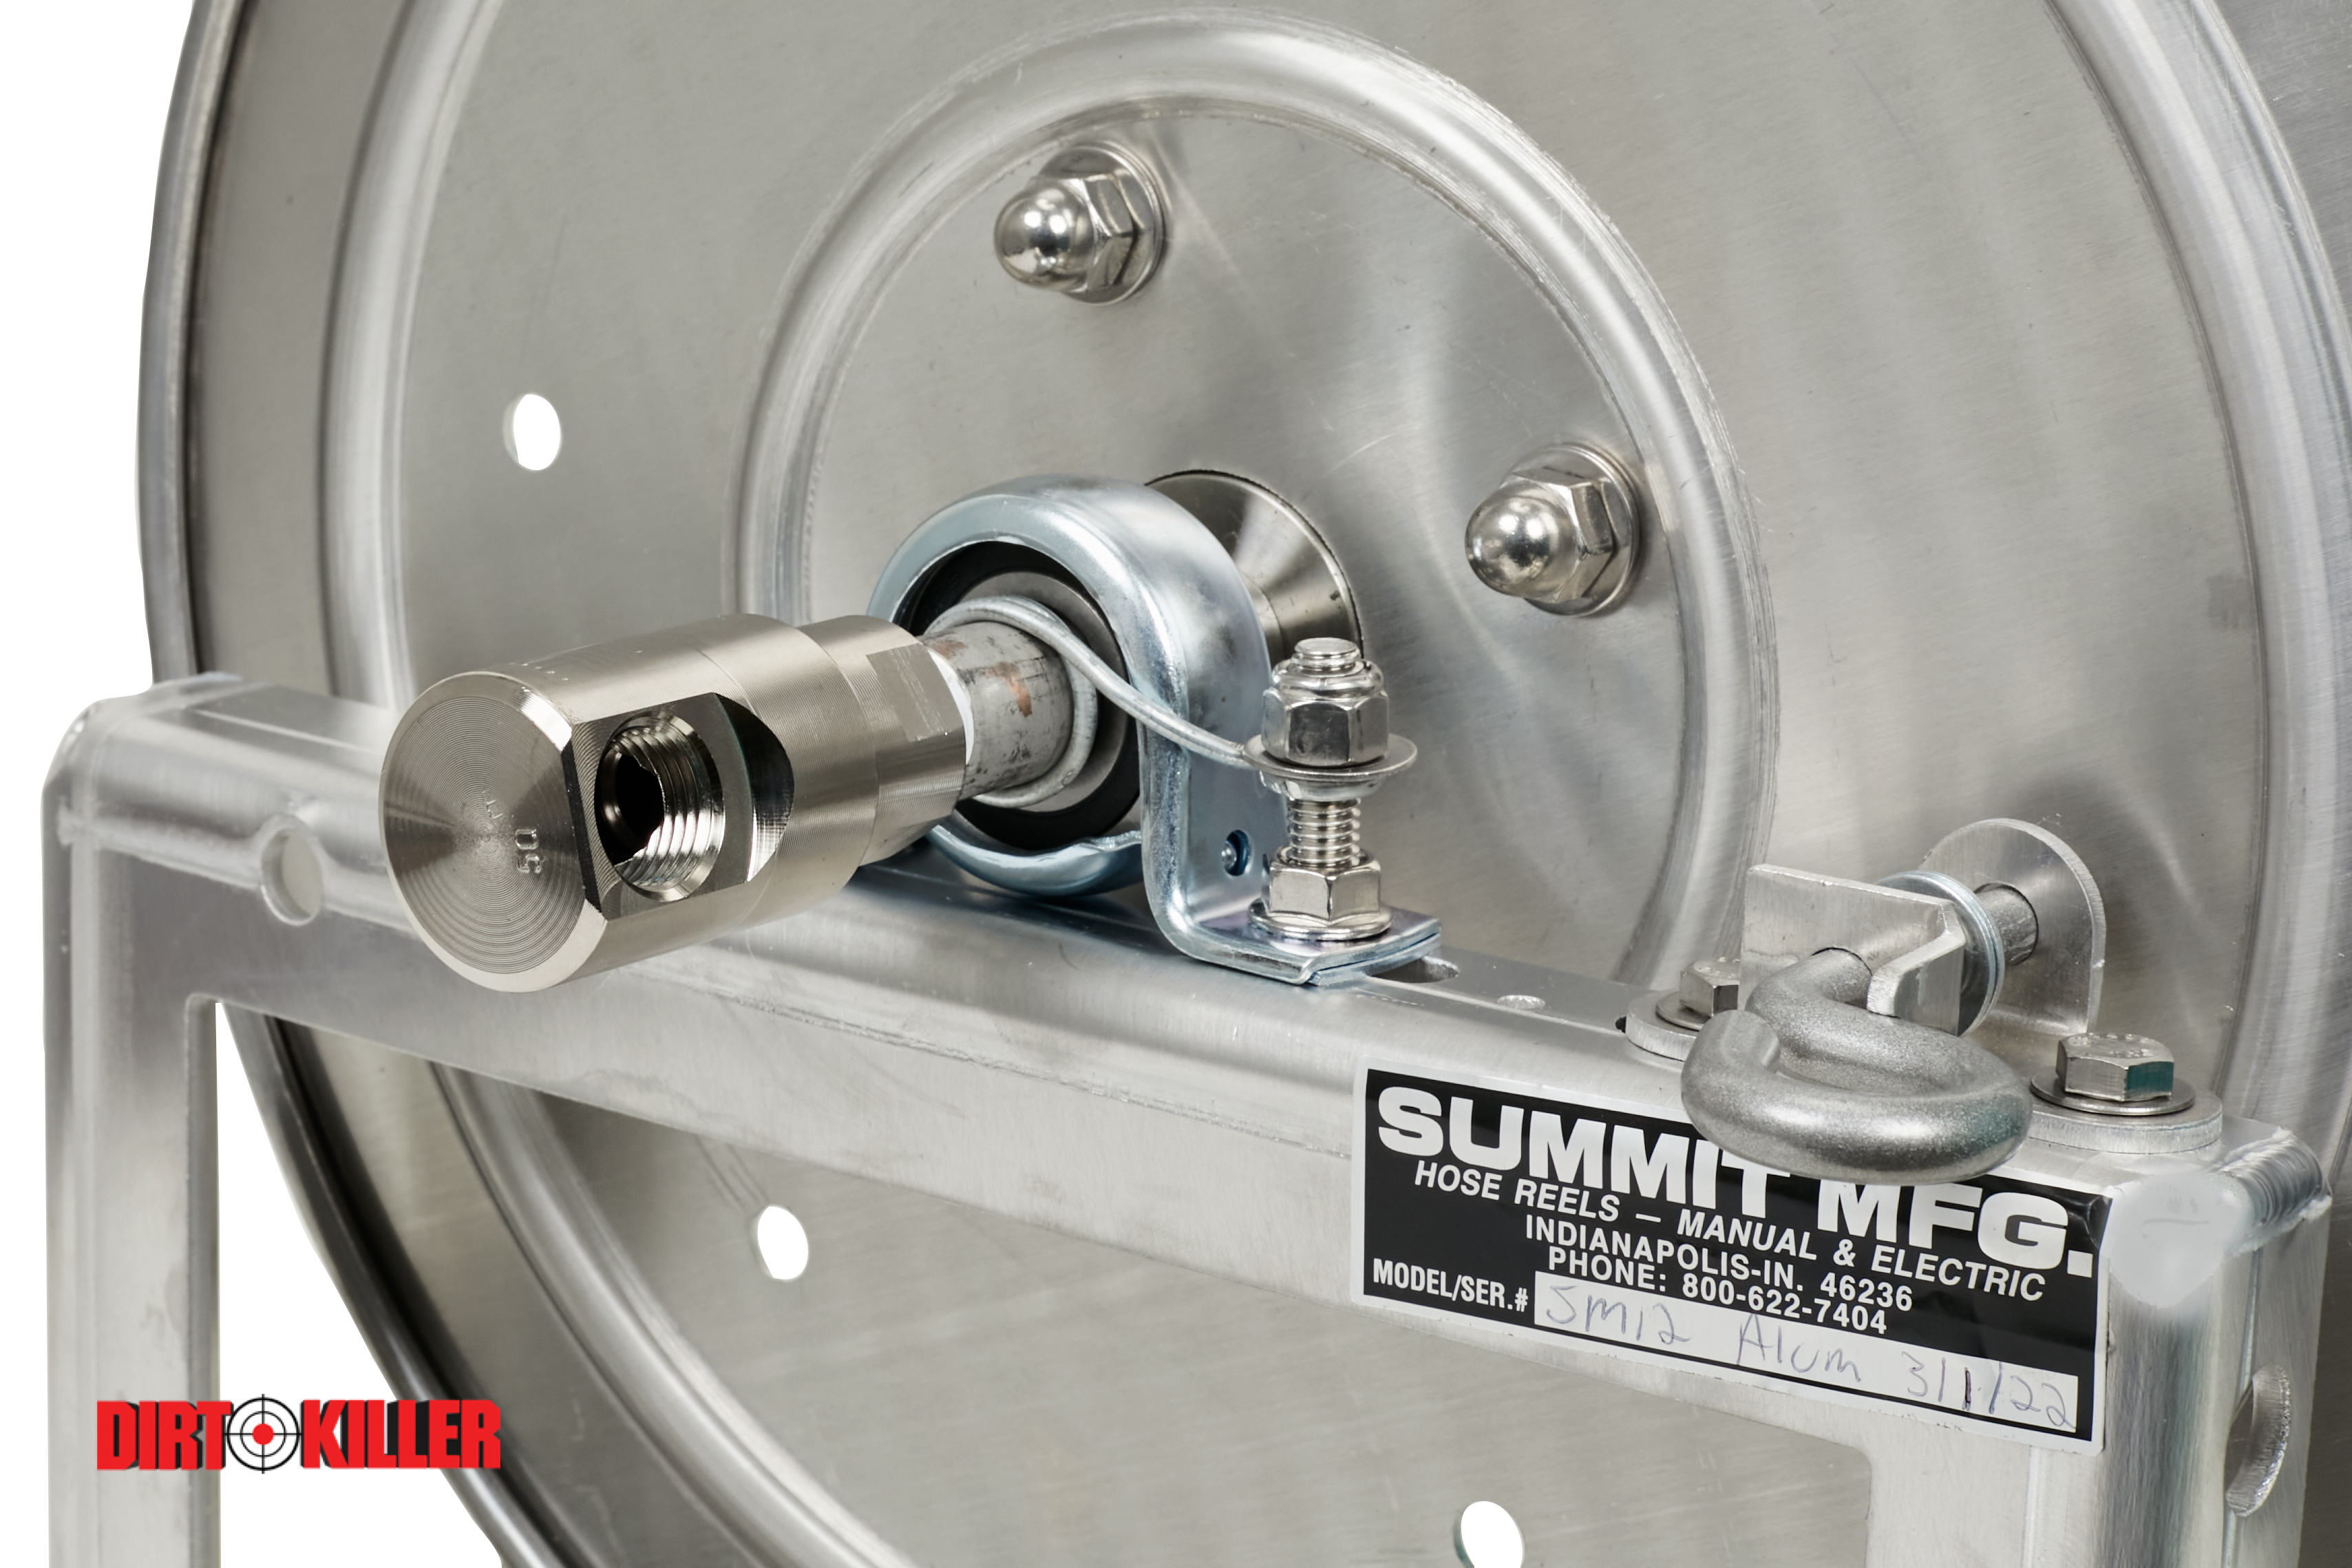 Summit Hose Reel SM12 Aluminum Externals With Stainless Manifold, Fits 200' of 1/2" Ag Hose-image_3